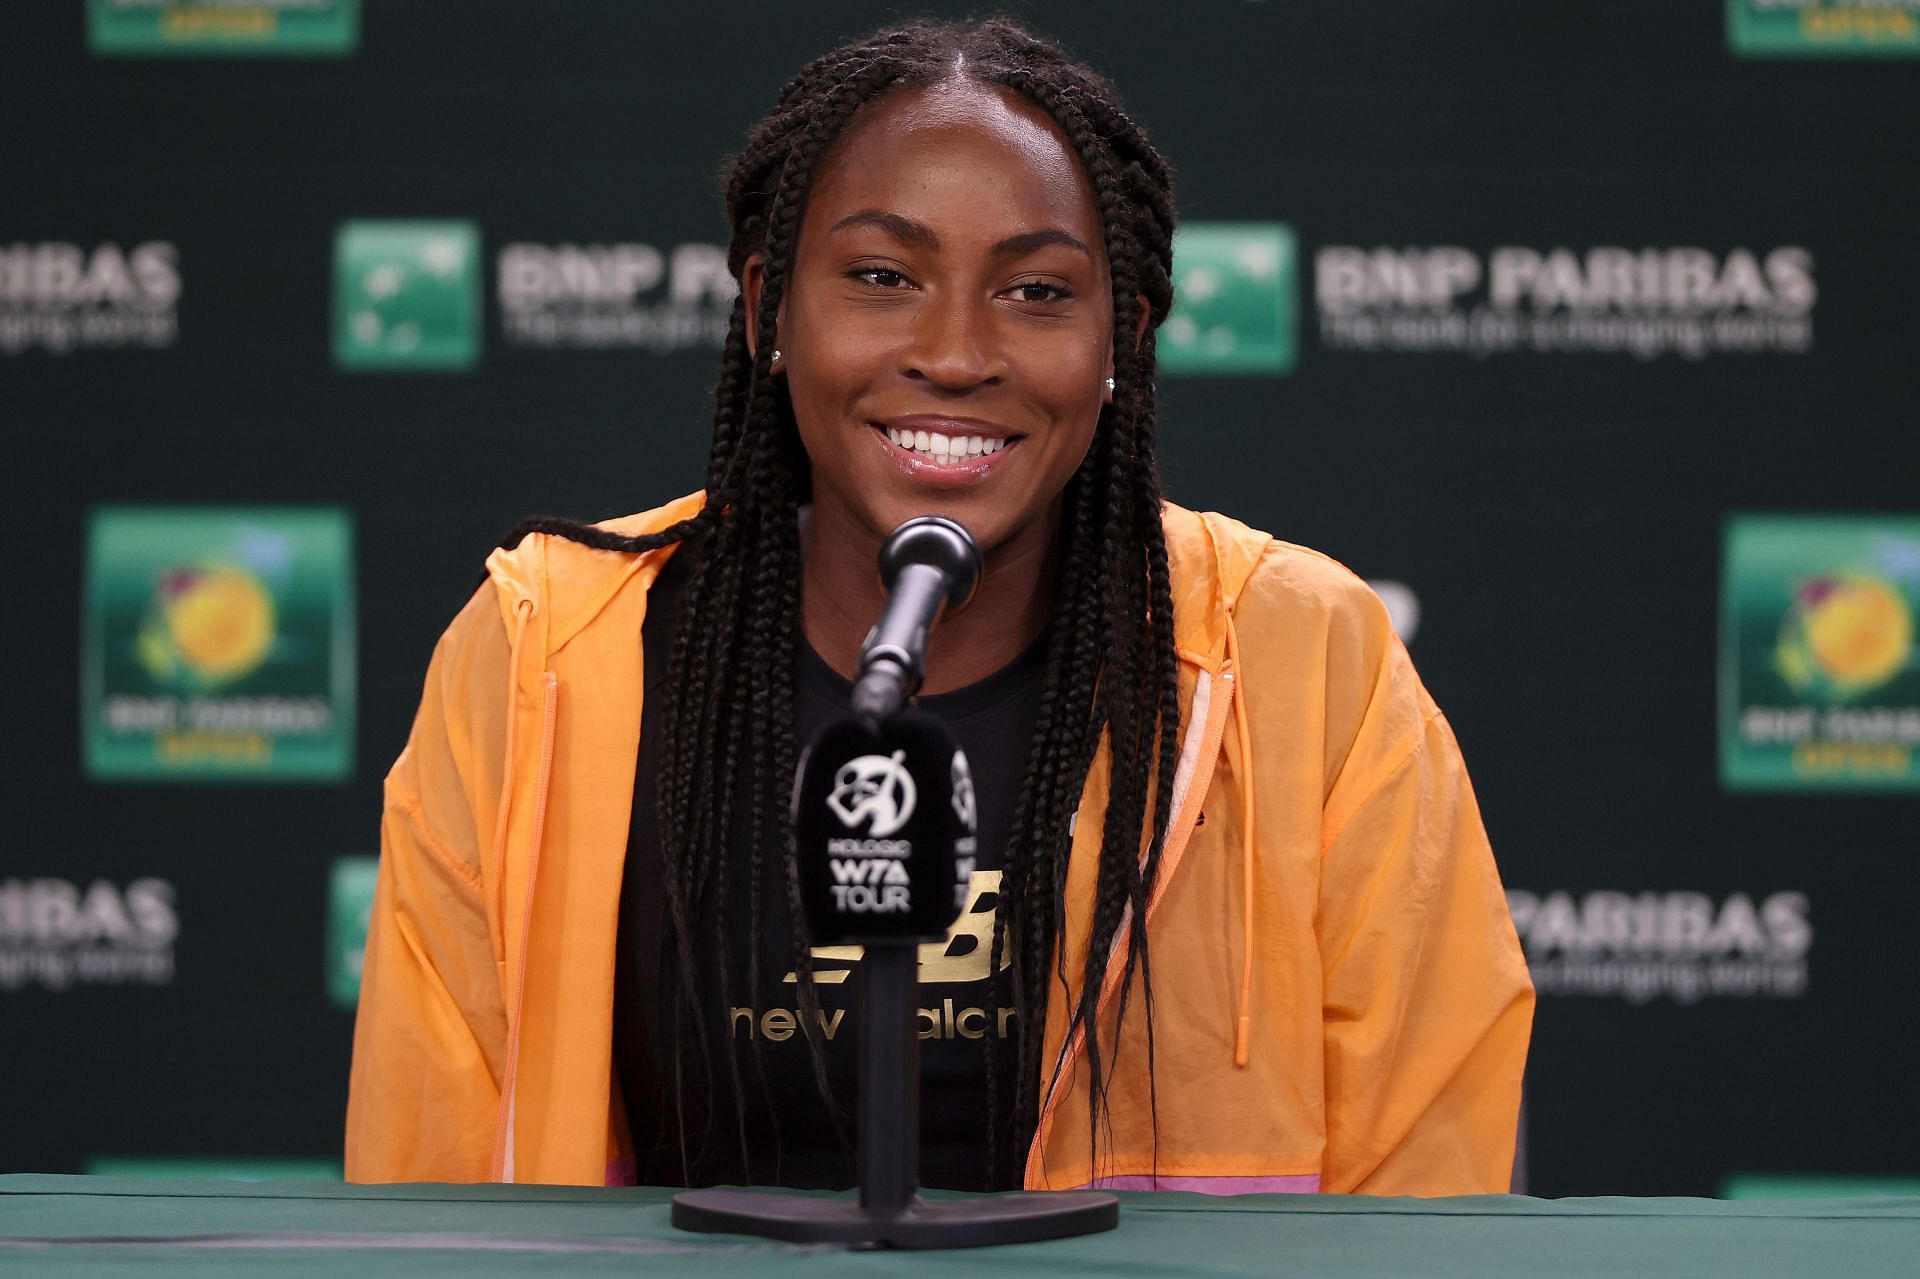 Gauff at the 2022 Indian Wells Open.